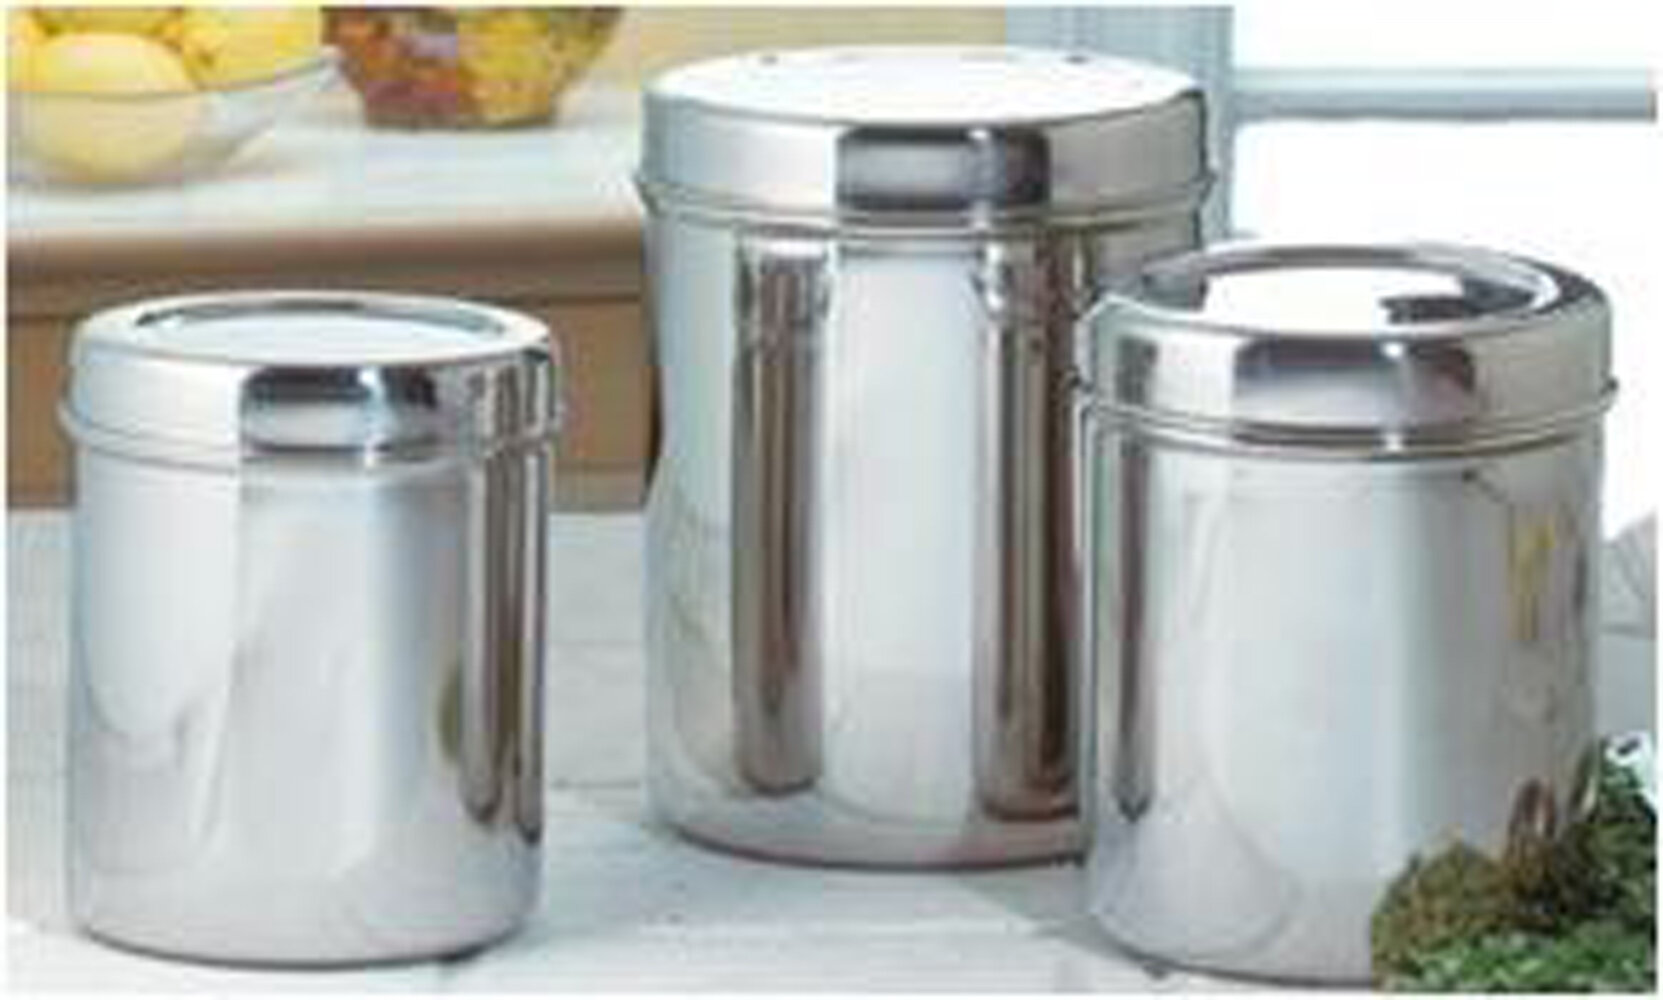 Stainless Steel Canisters 3pc set Blue or Red Lid Tin Camping 13,15 & 18cm 